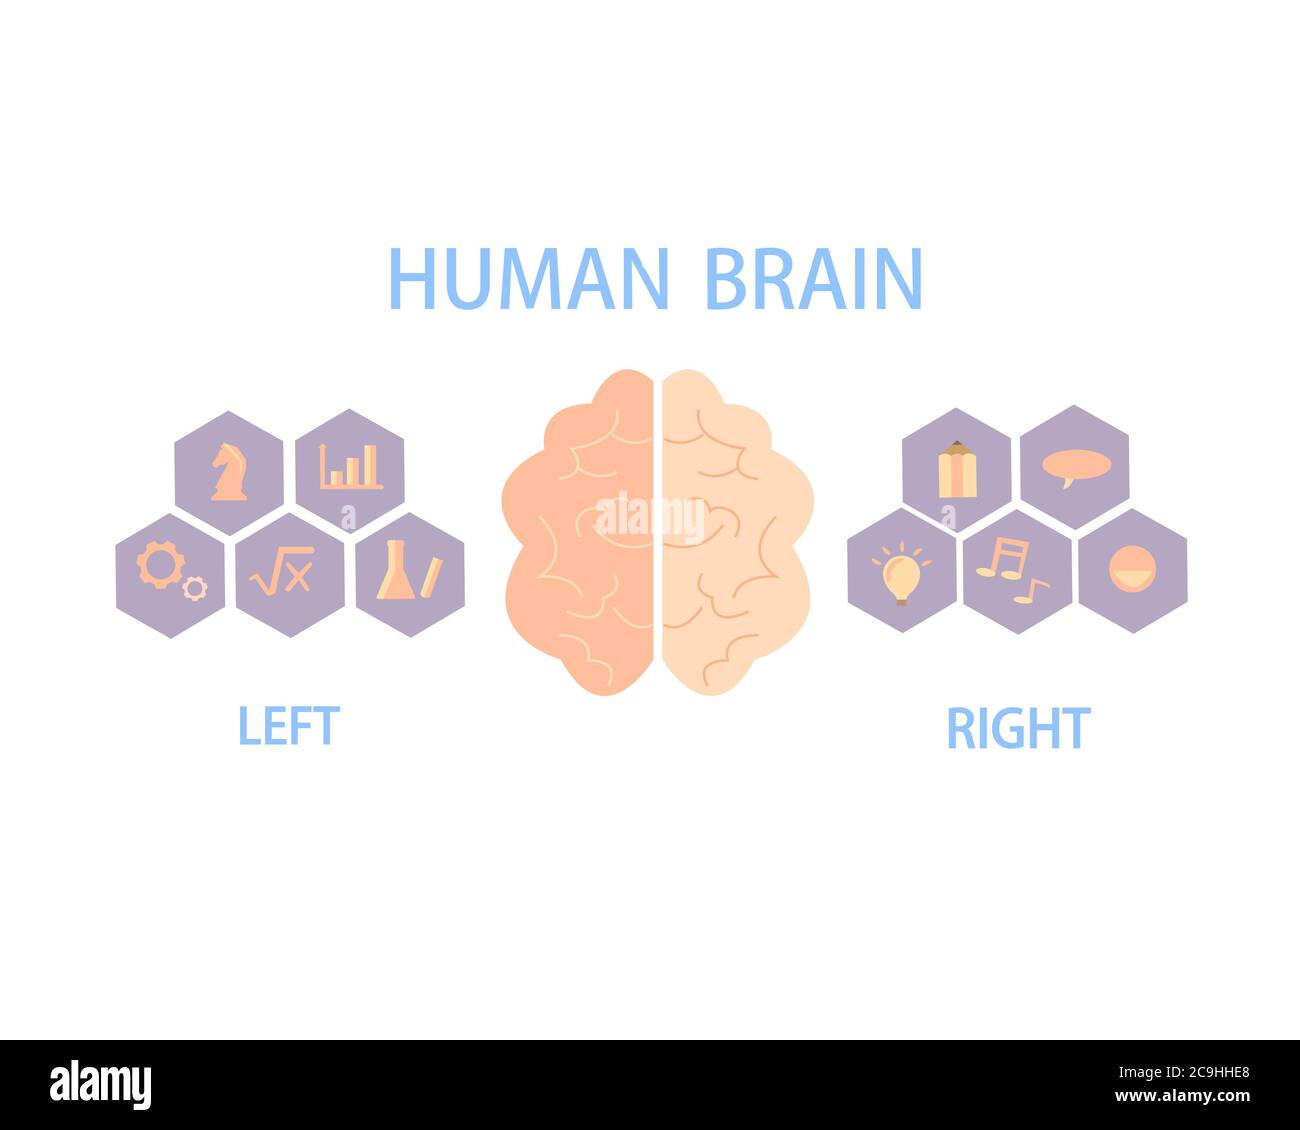 Human brain divide into left and right hemispheres for control of the body and behavior. Stock Vector